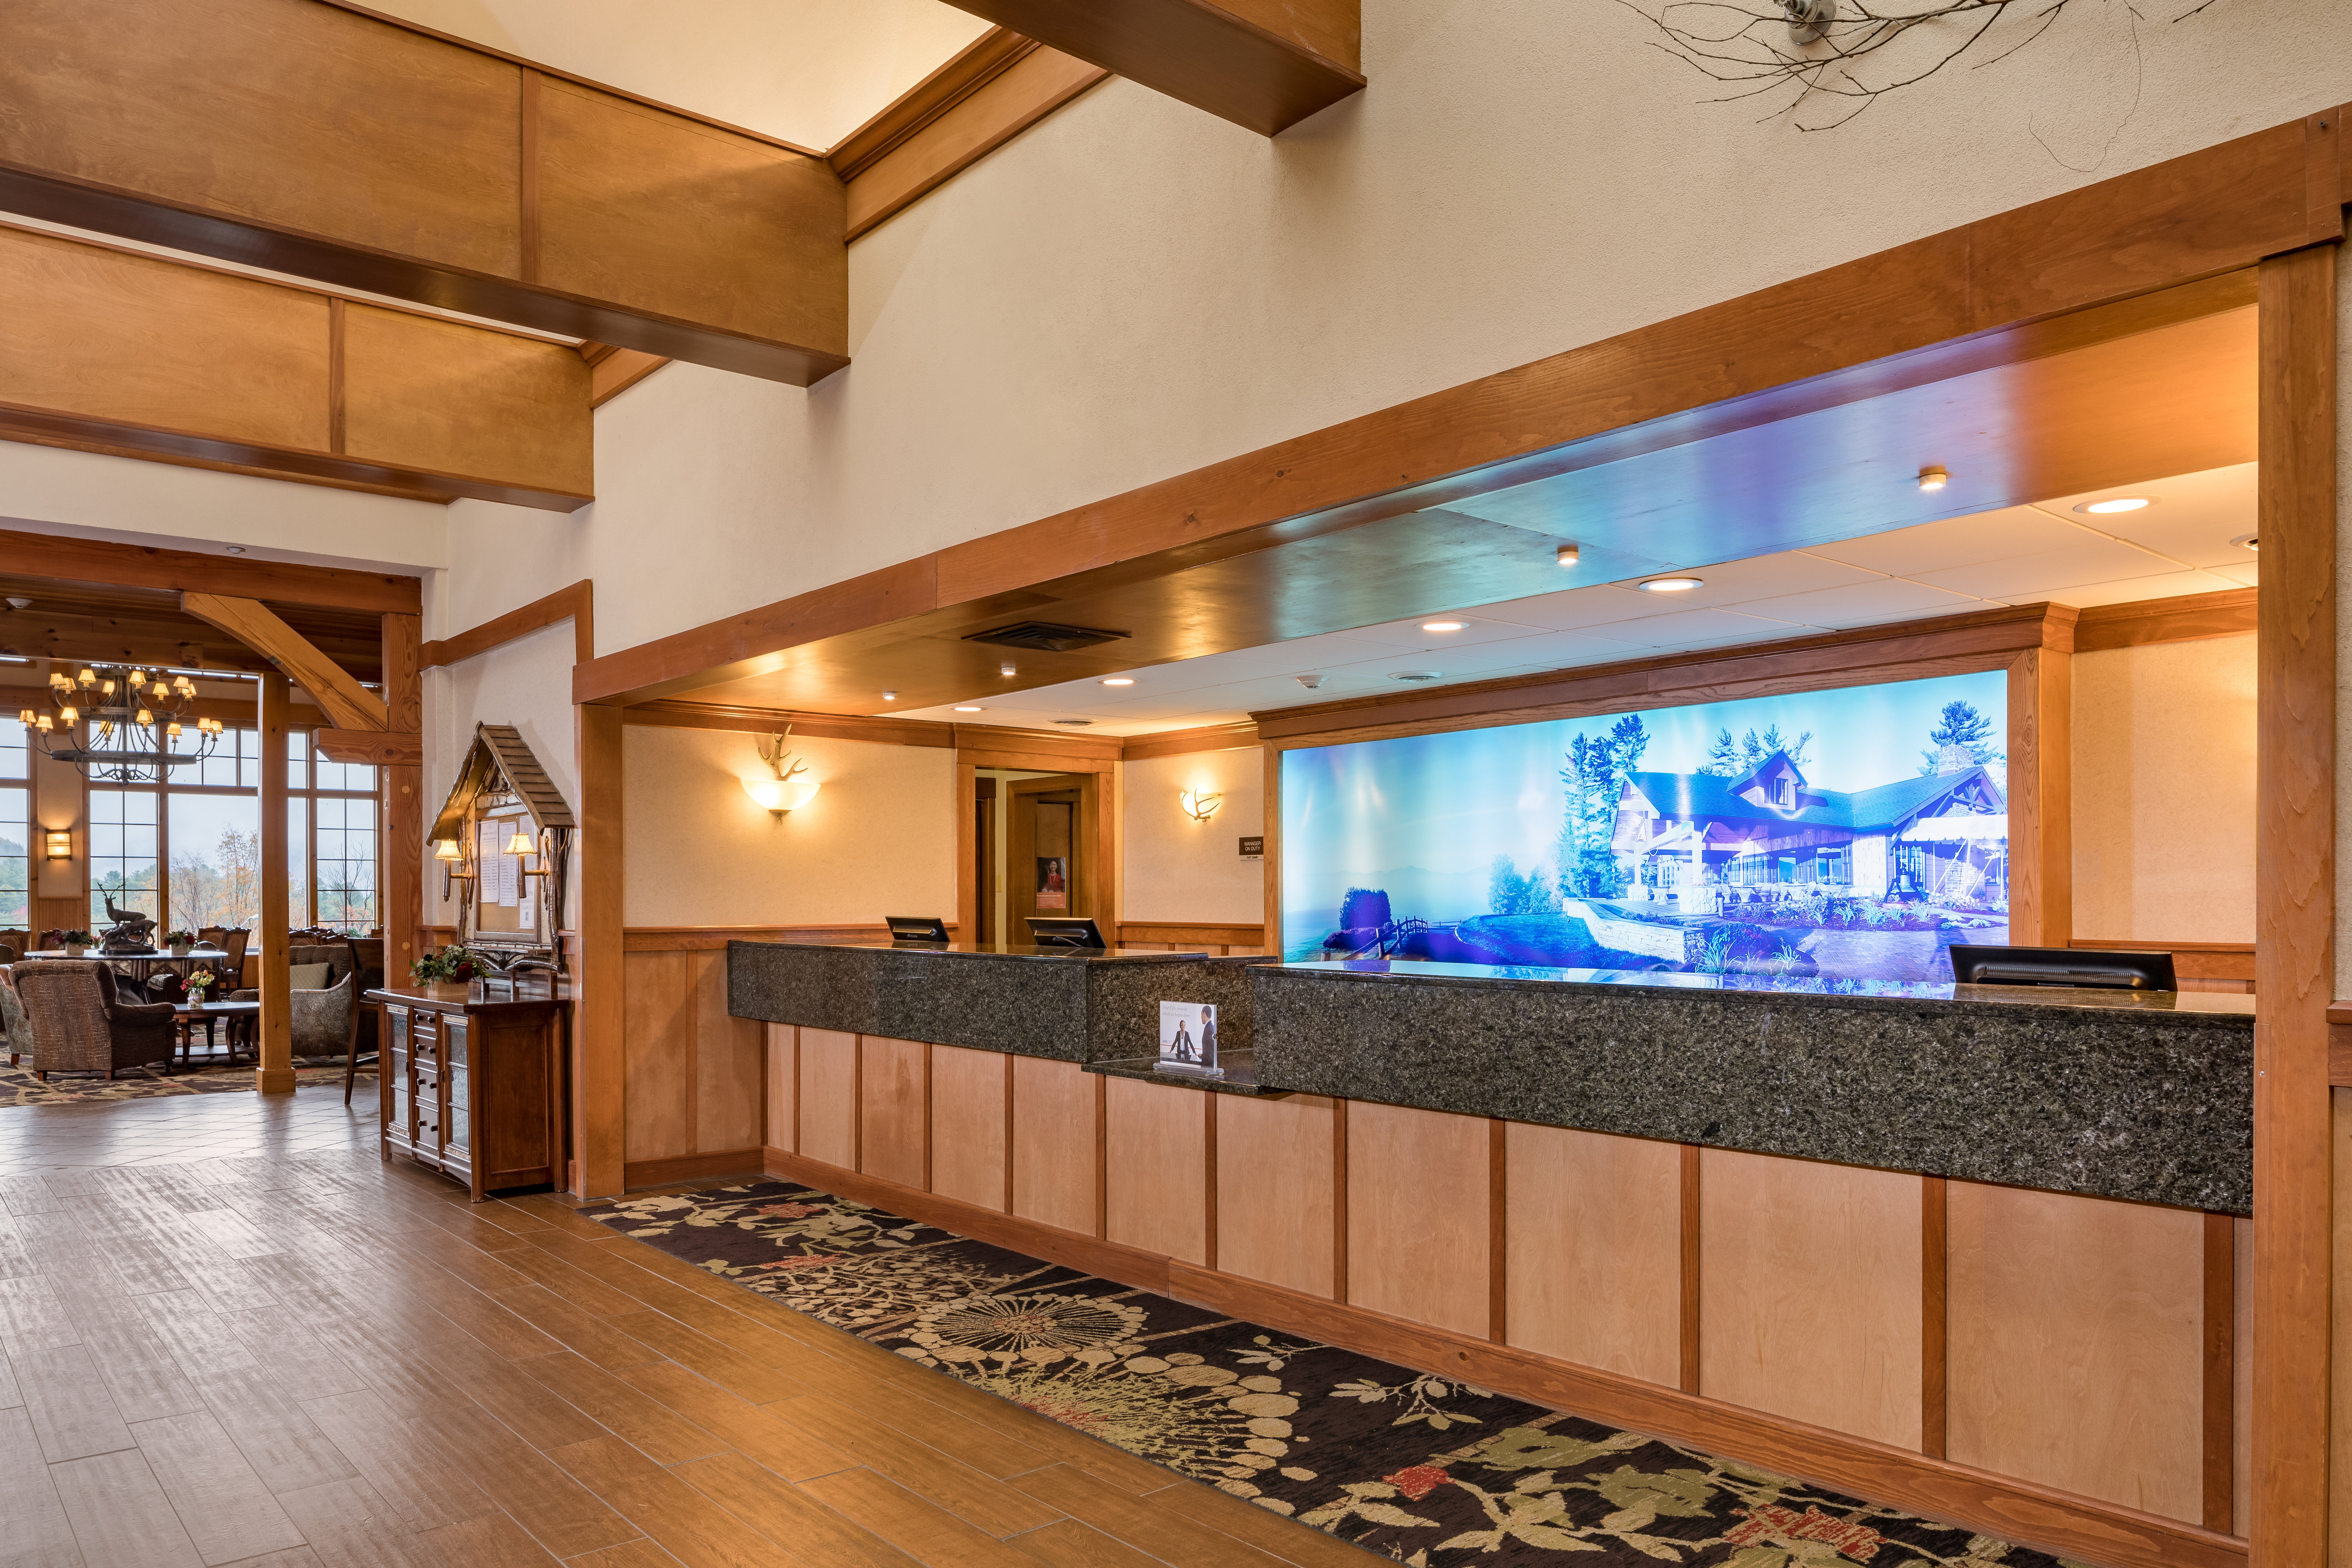 Our front desk is just a few steps from our Adirondack Great Room